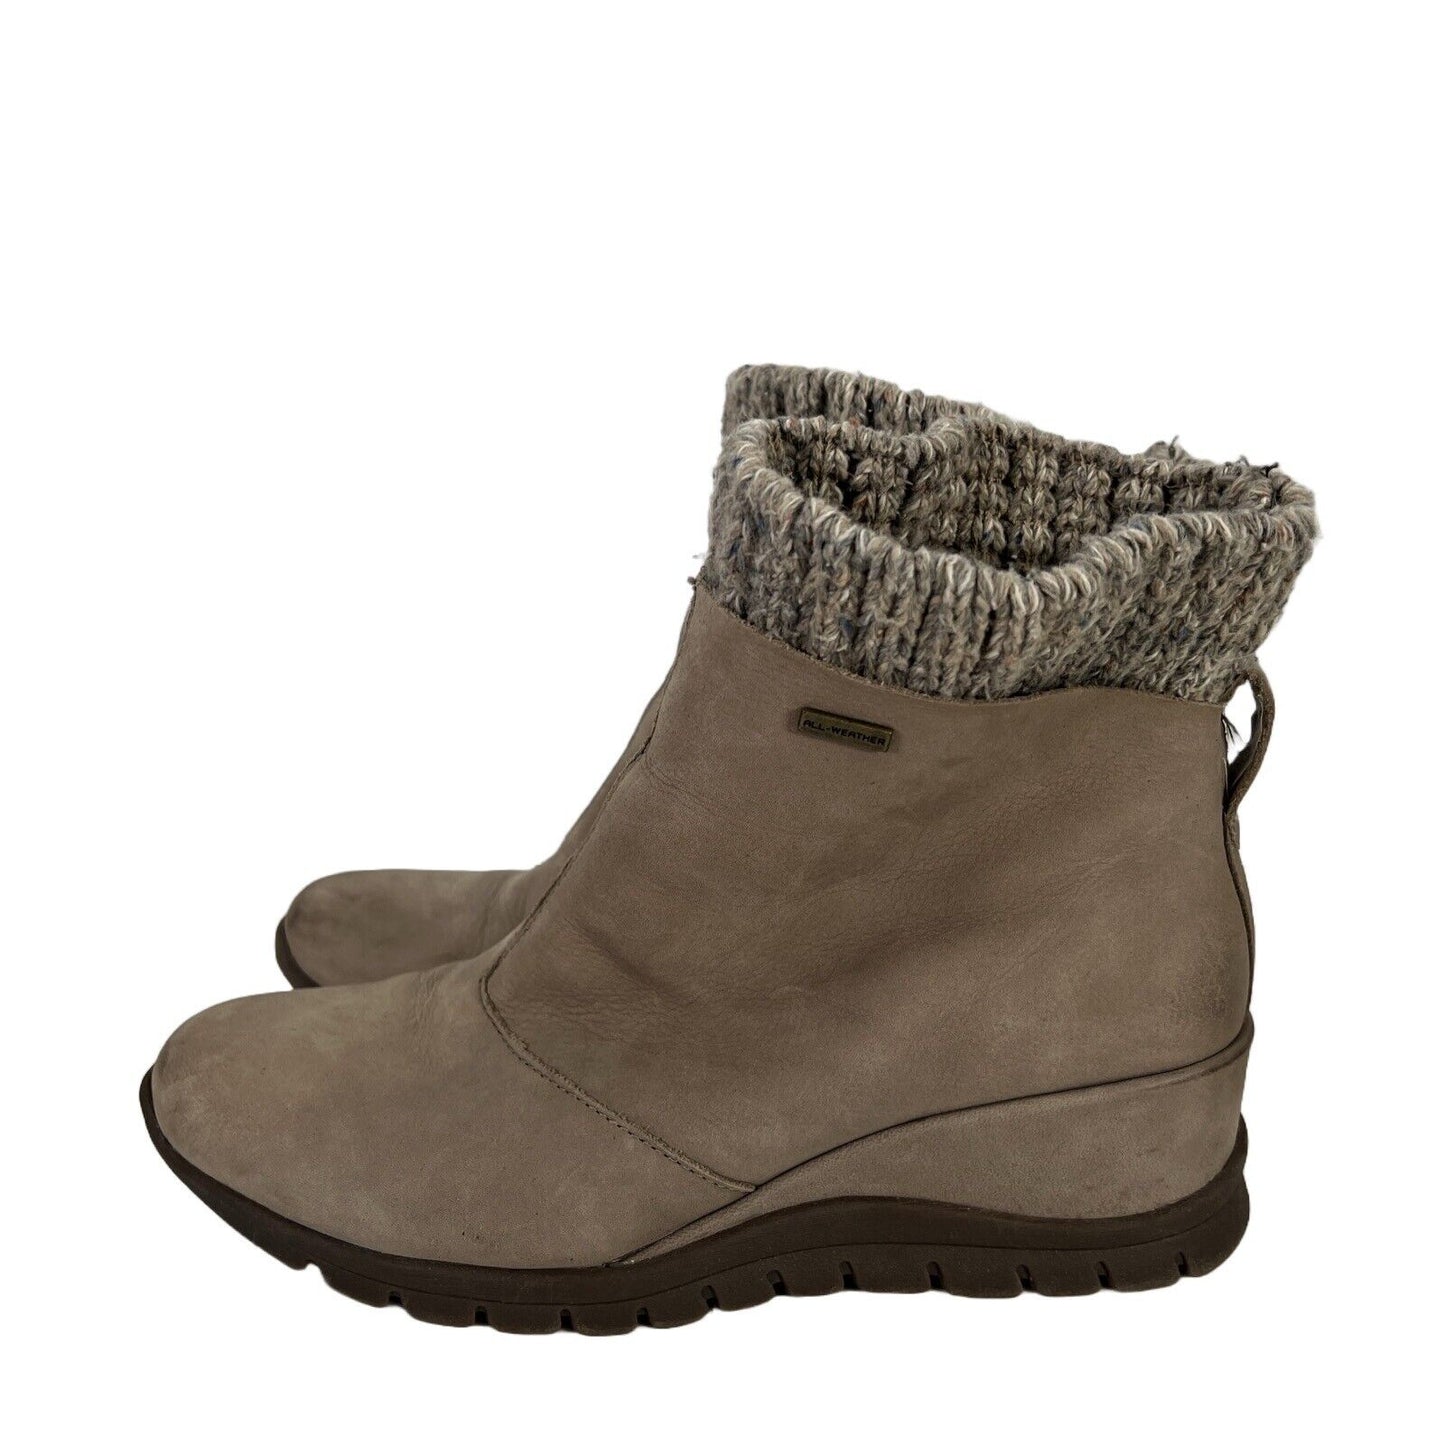 Bionica Women's Beige Suede Knit Lined Ankle Boots - 9